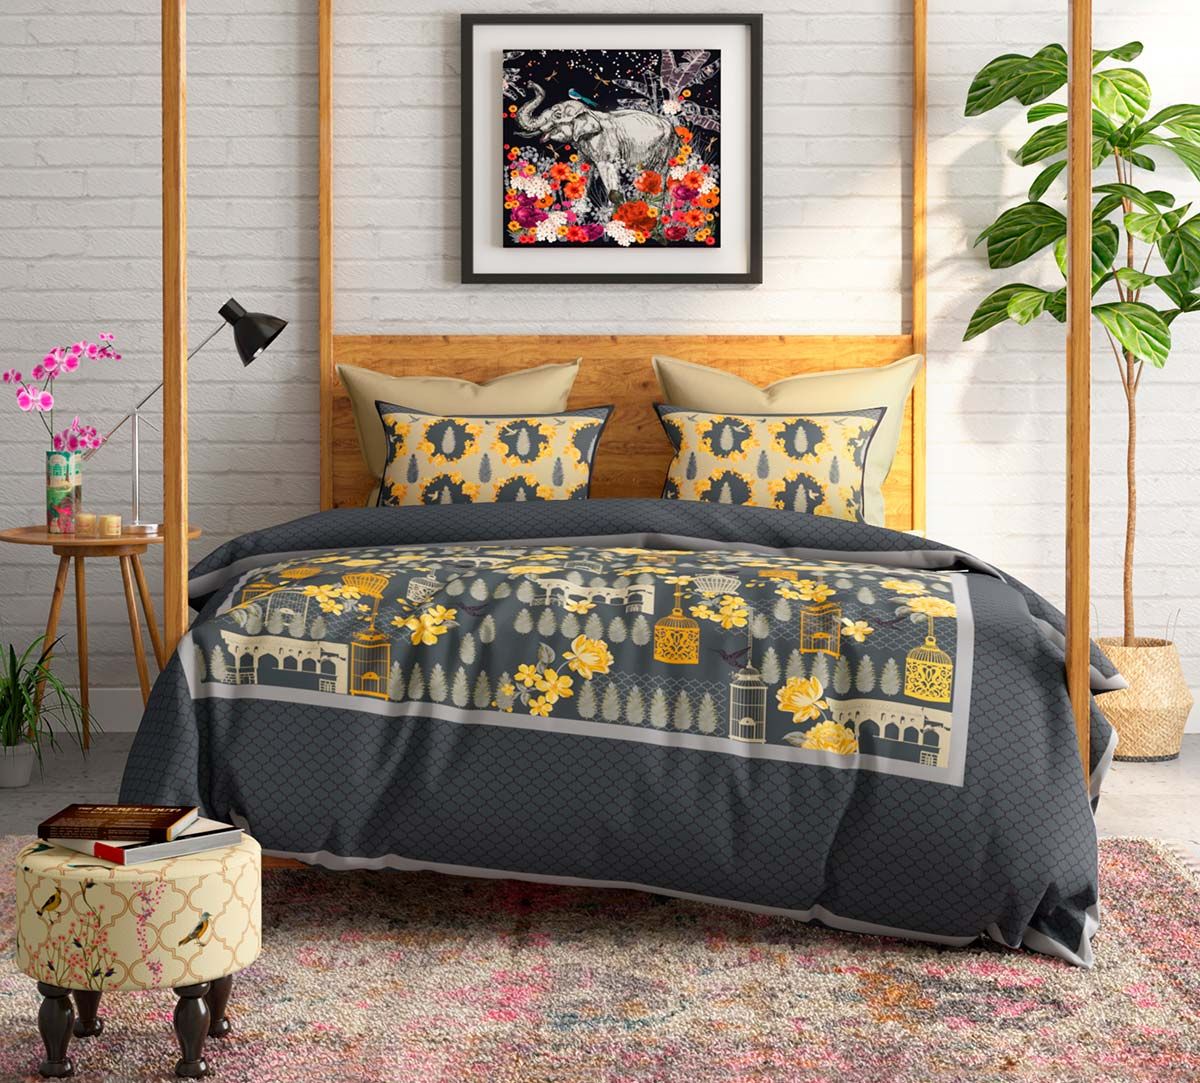 Buy Designer Cotton Bed Sheets At Great Price